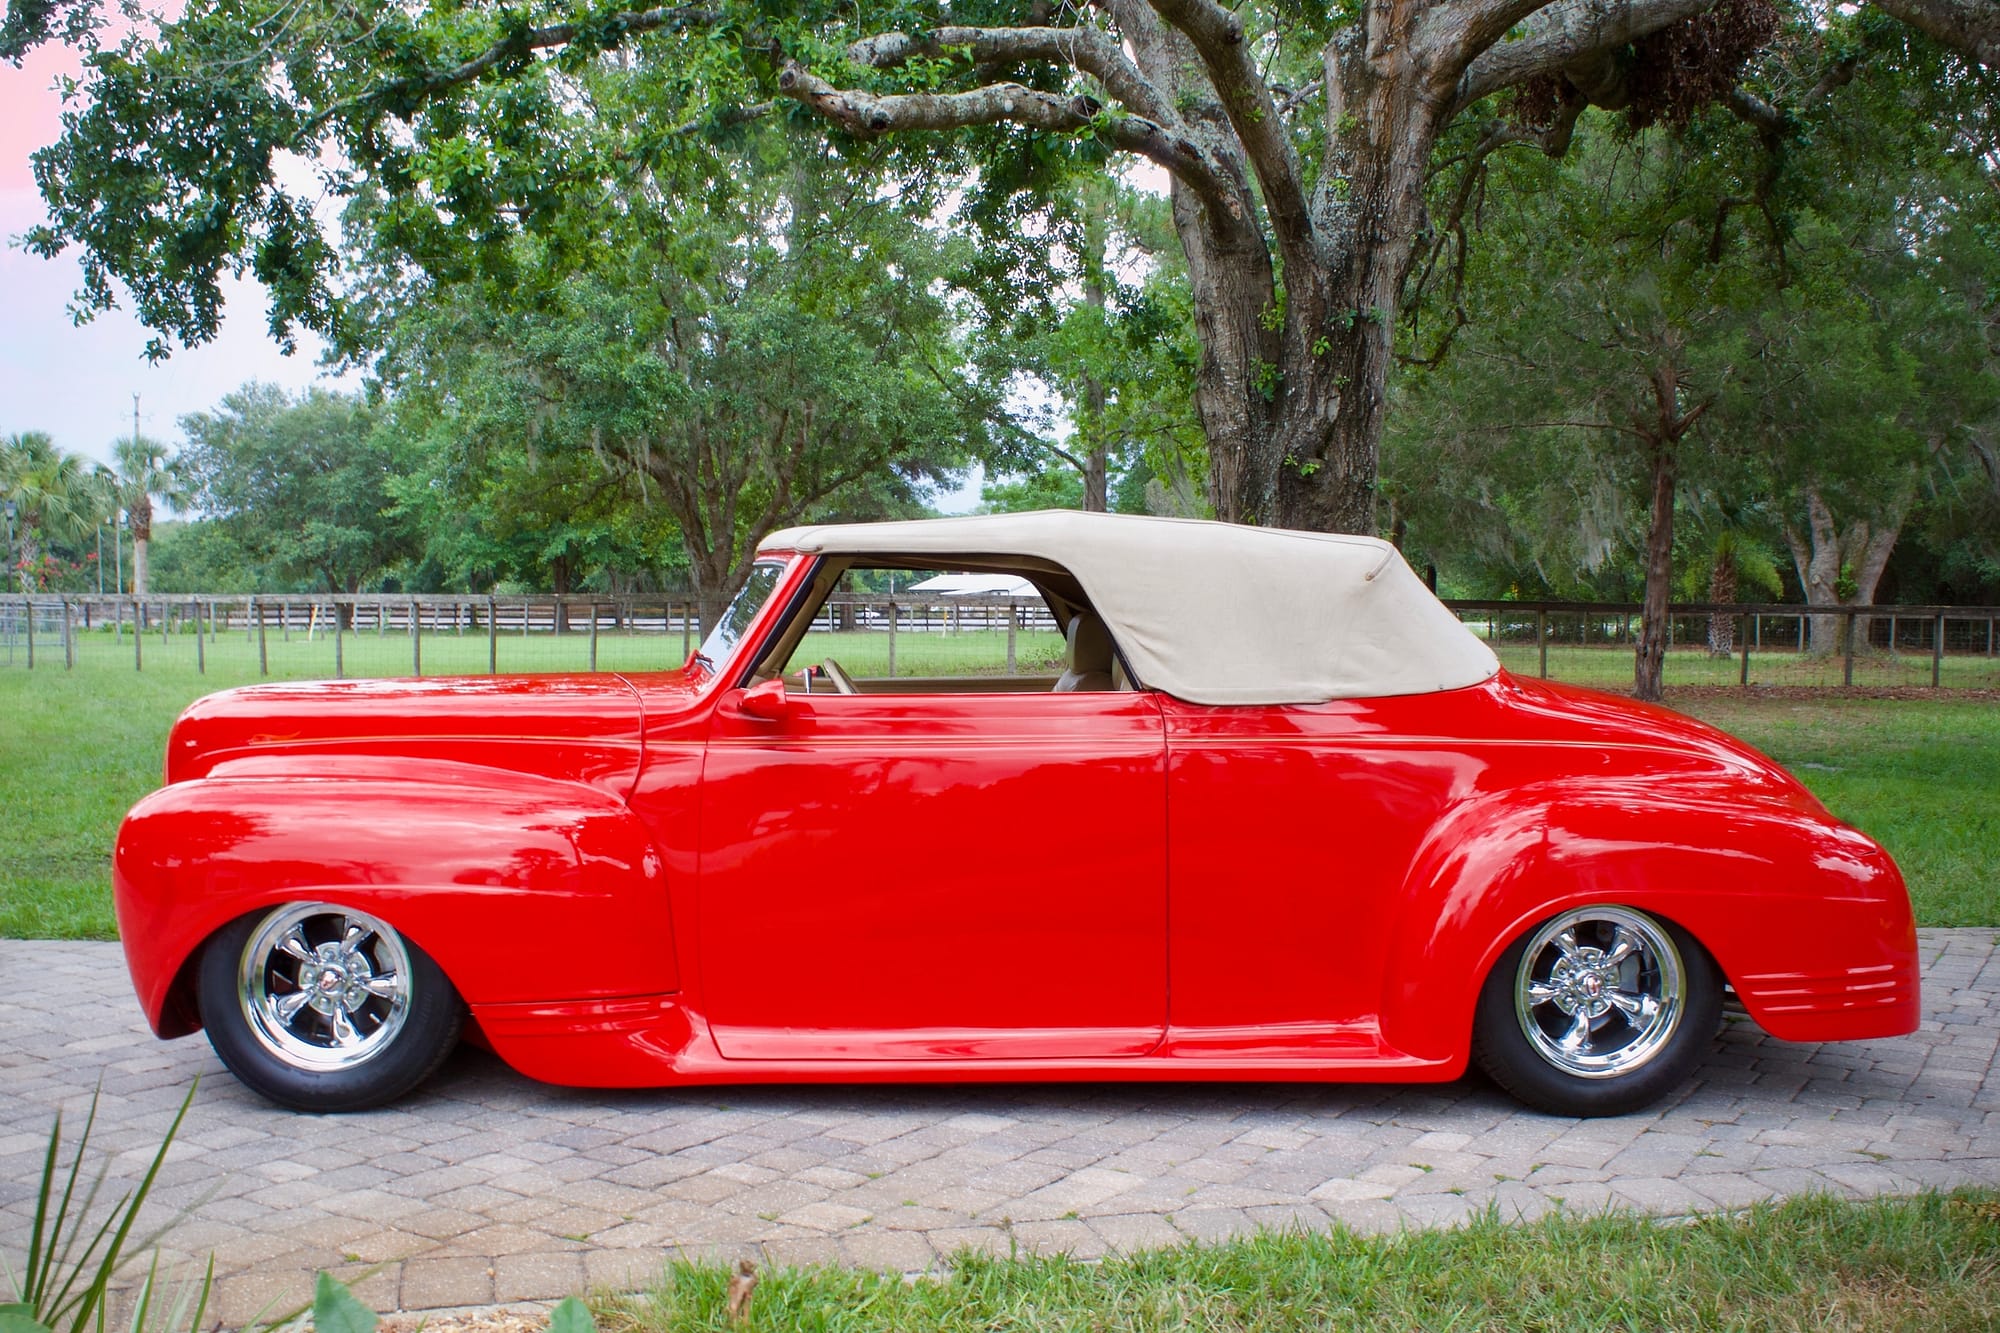 1941 Plymouth Convertible Red 14